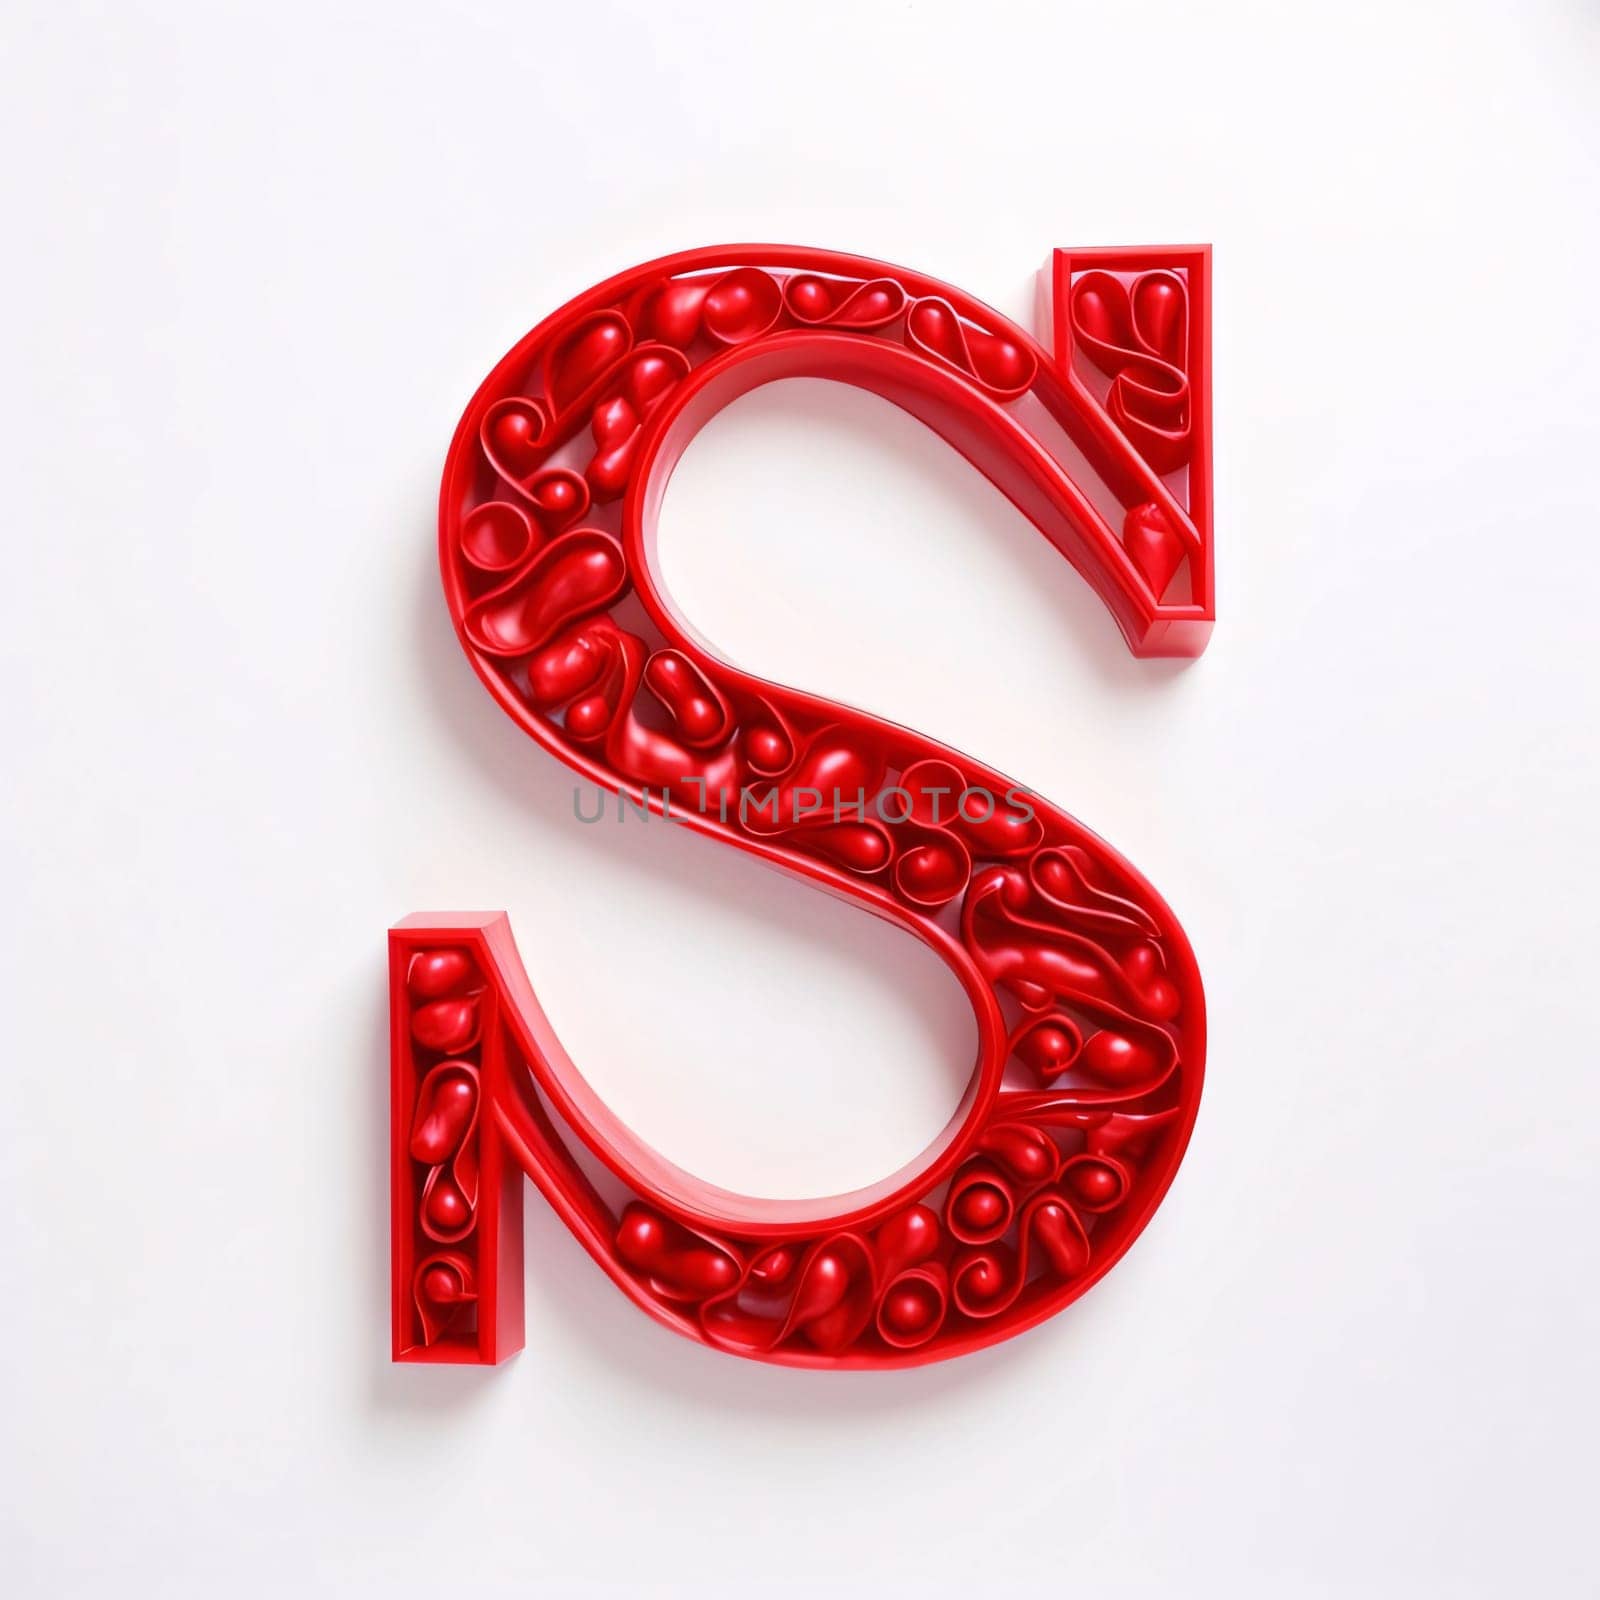 Alphabet letter S made of red plastic on white background. 3d rendering by ThemesS